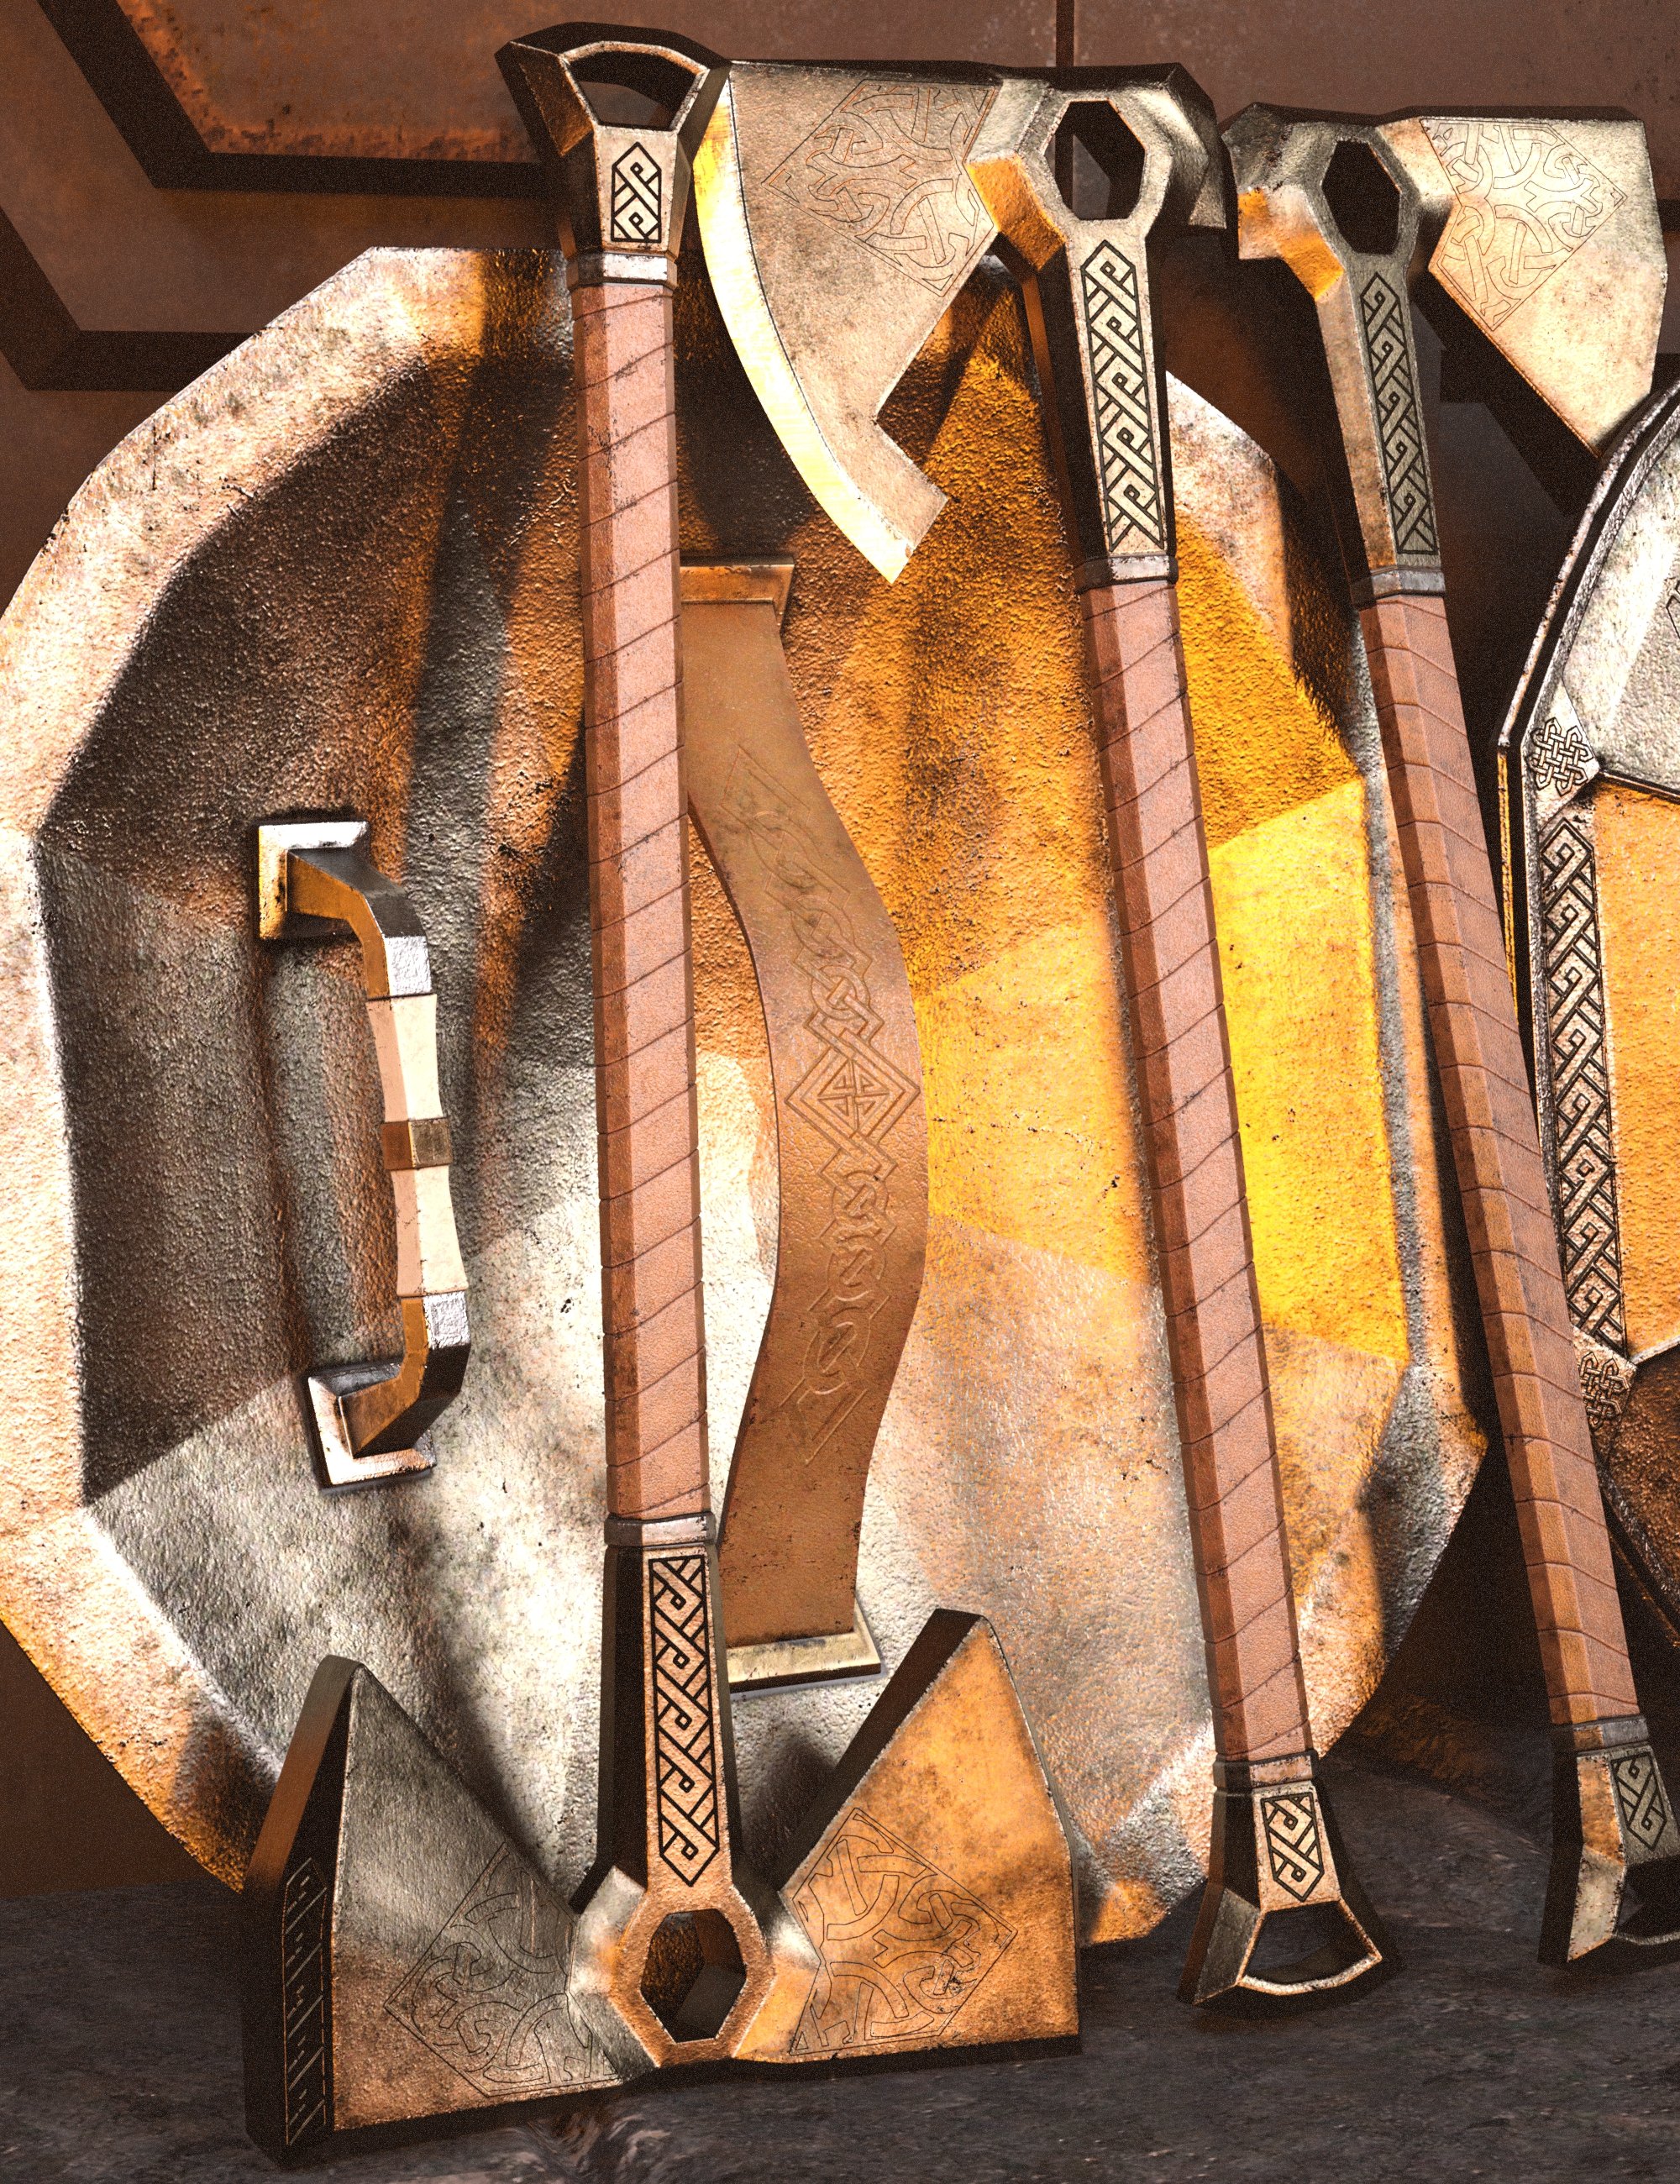 Calgrima Weapons Collection by: Britech, 3D Models by Daz 3D